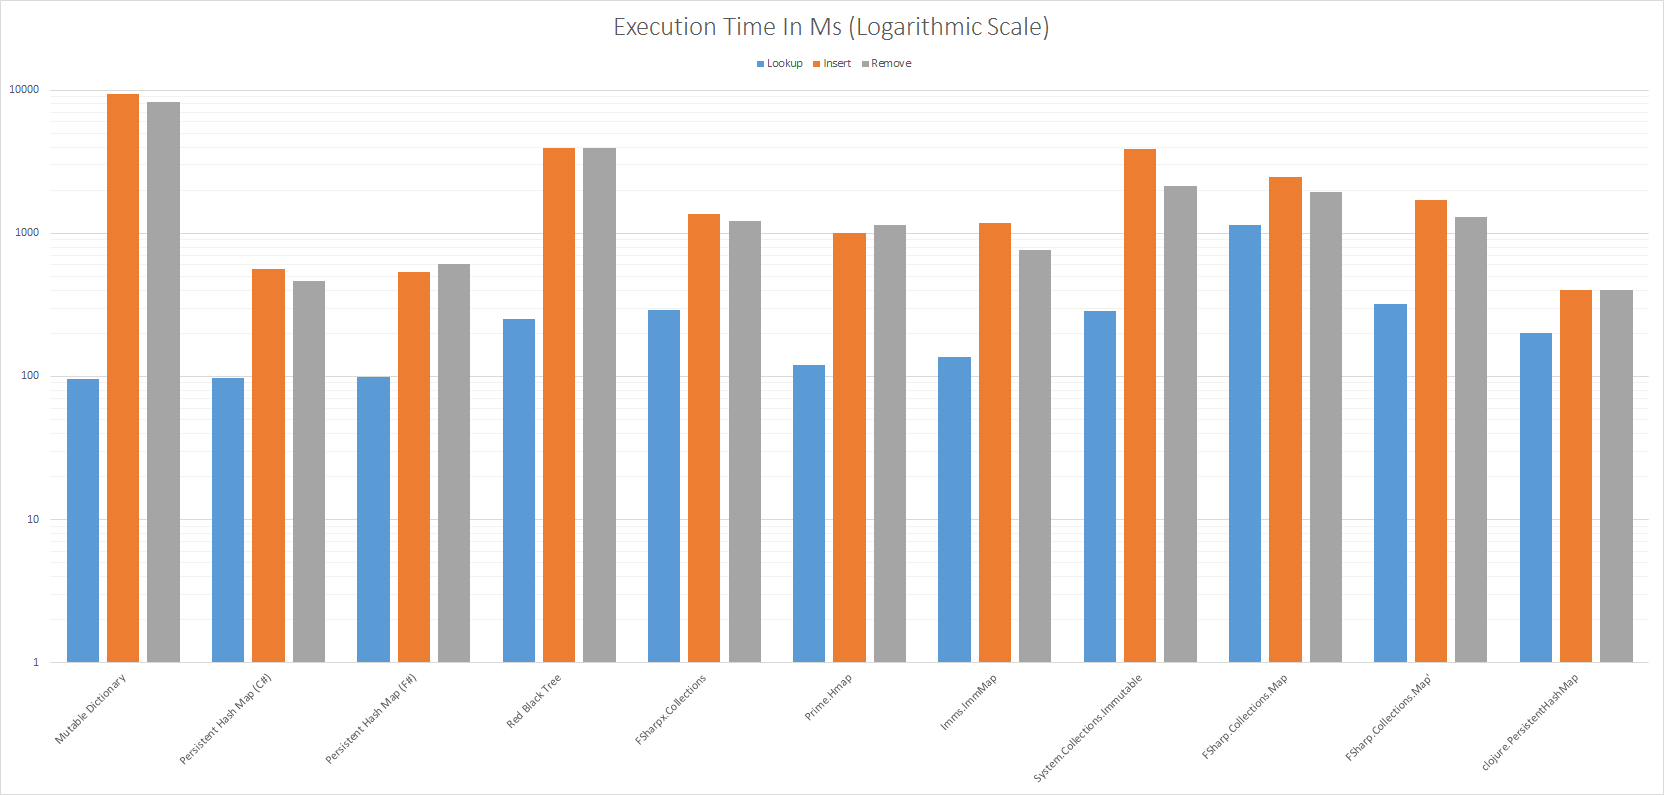 Execution Time In Ms (Logarithmic Scale)